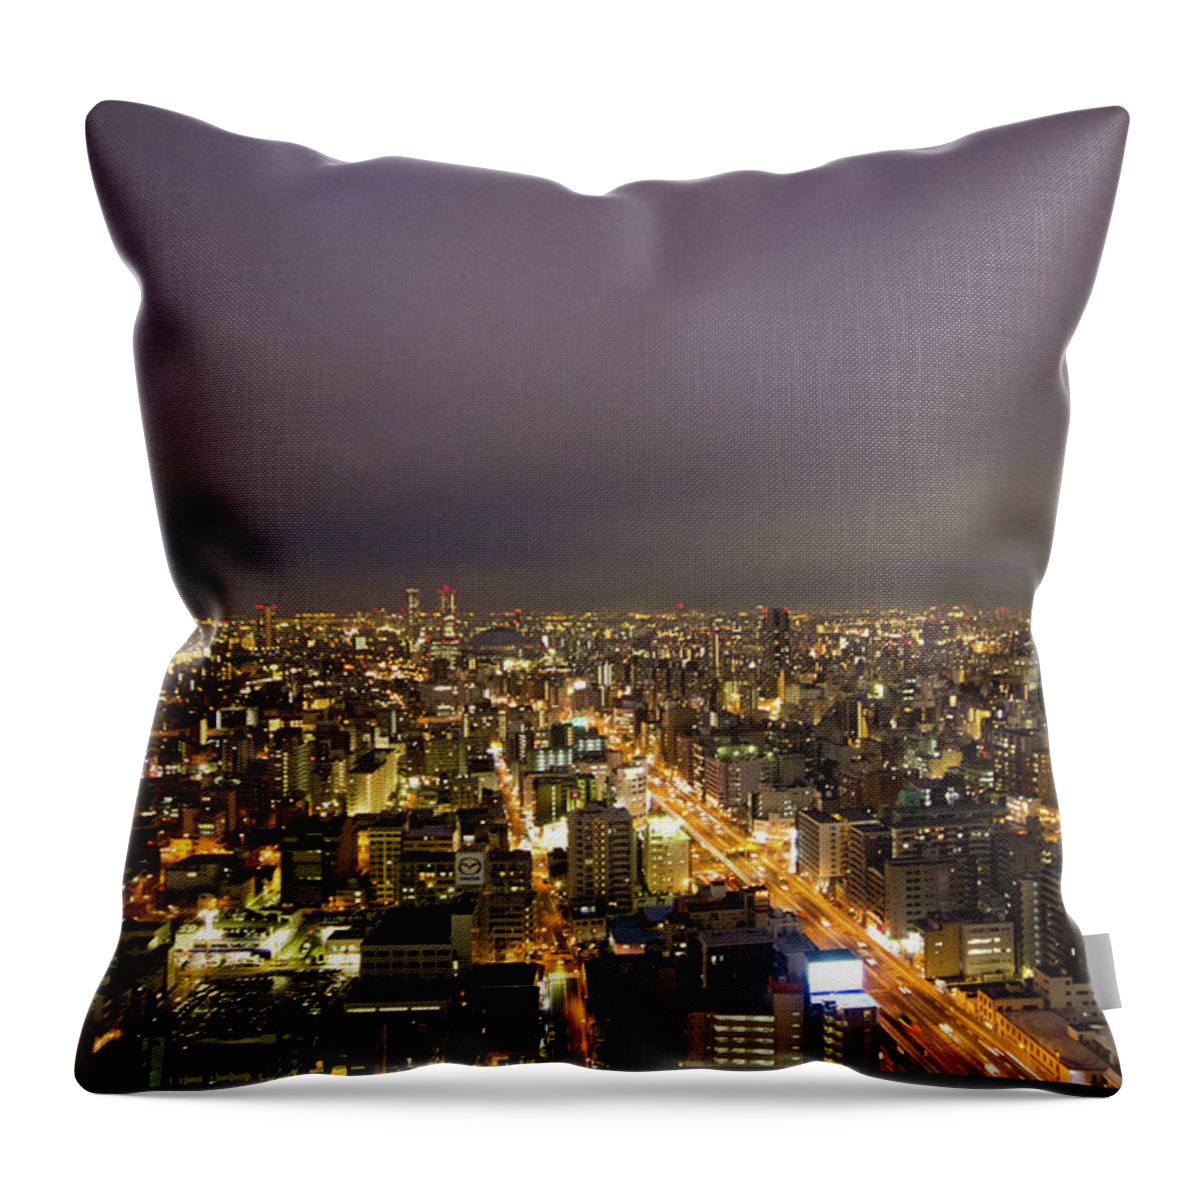 Scenics Throw Pillow featuring the photograph Osaka Skyline by Alex Barlow